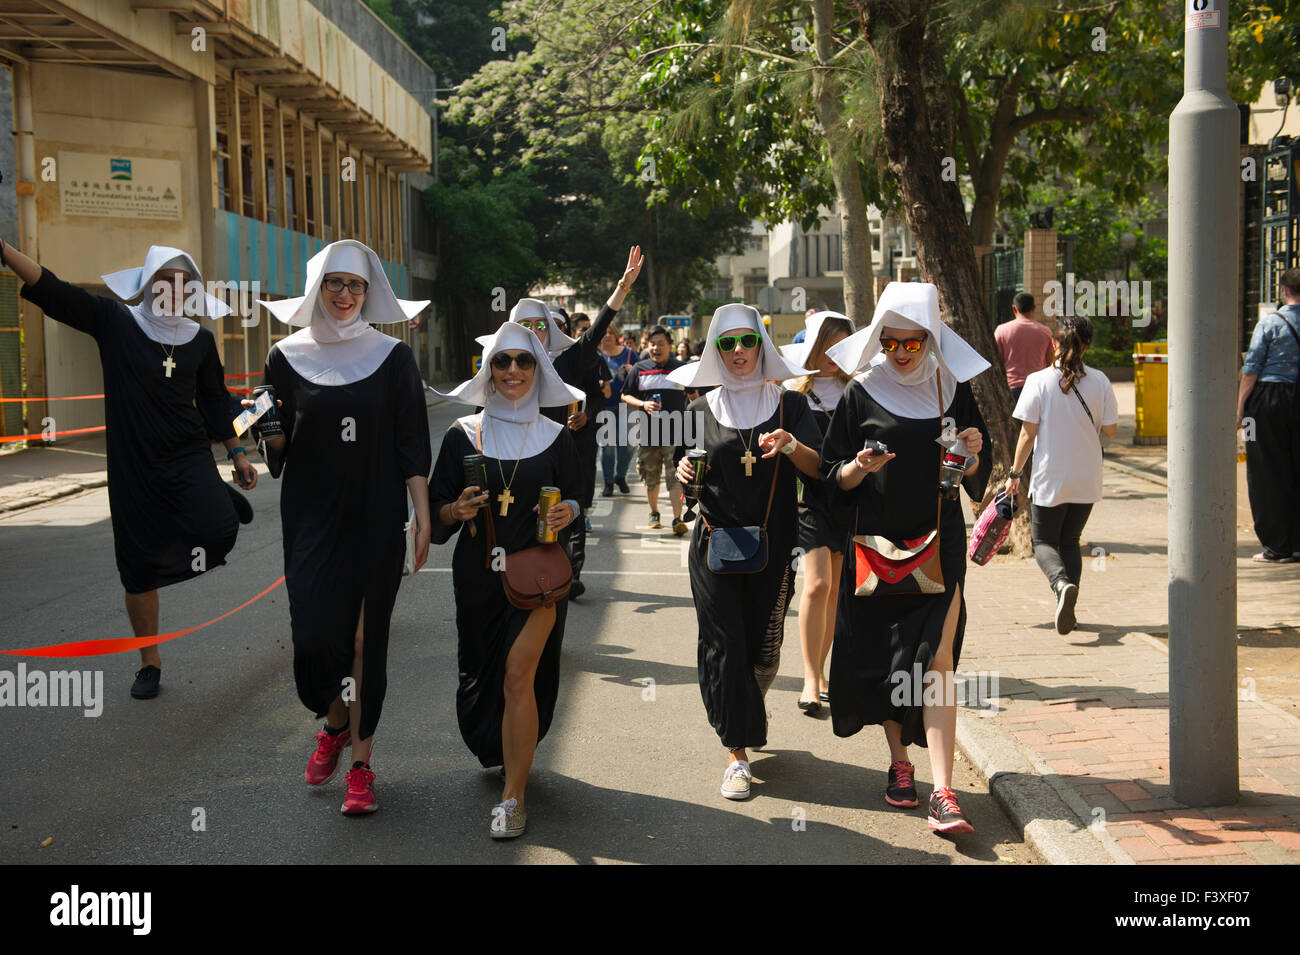 Sport fans on the way to Hong Kong Stadium dressed has nuns Stock Photo